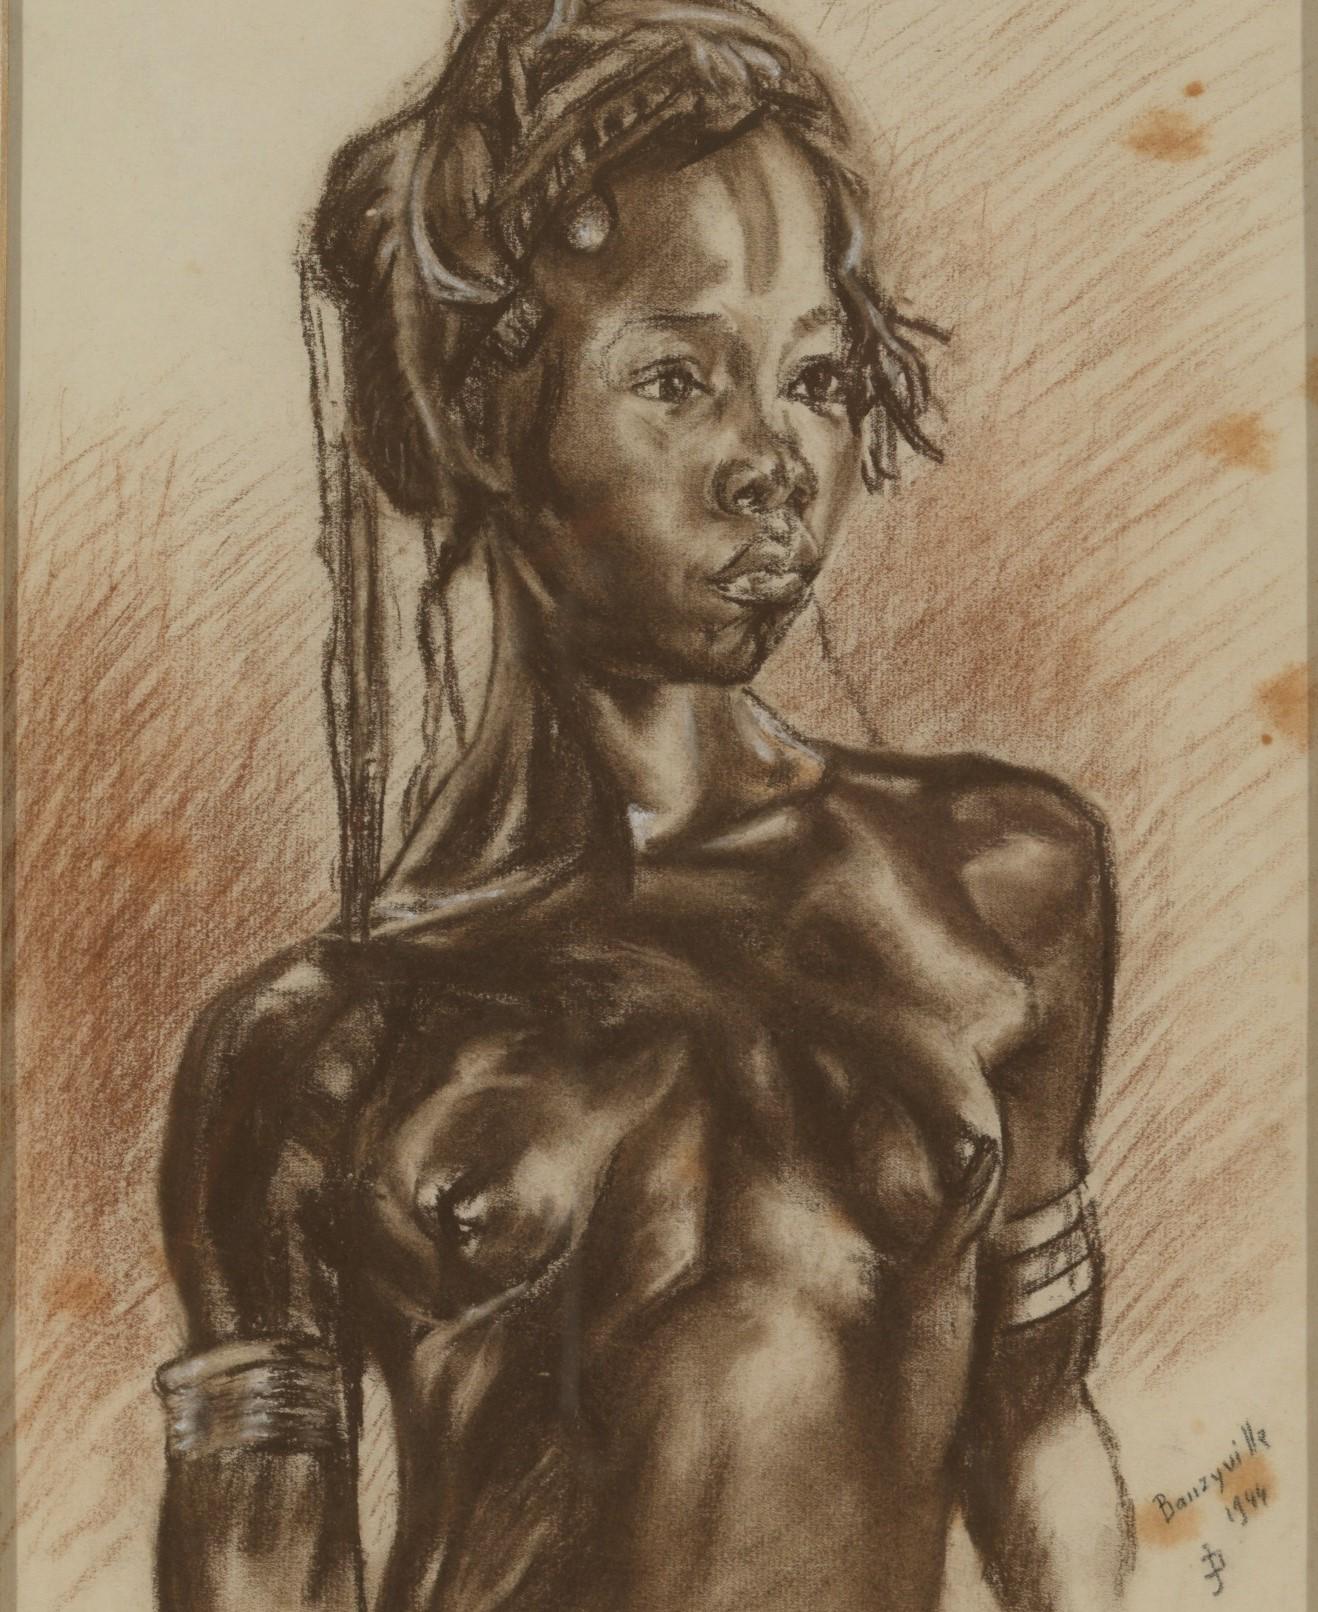 C.P. Initials,Portait of African Girl,Charcoal on Paper,Signed Banzyville 1944,Framed,Signed and Dated